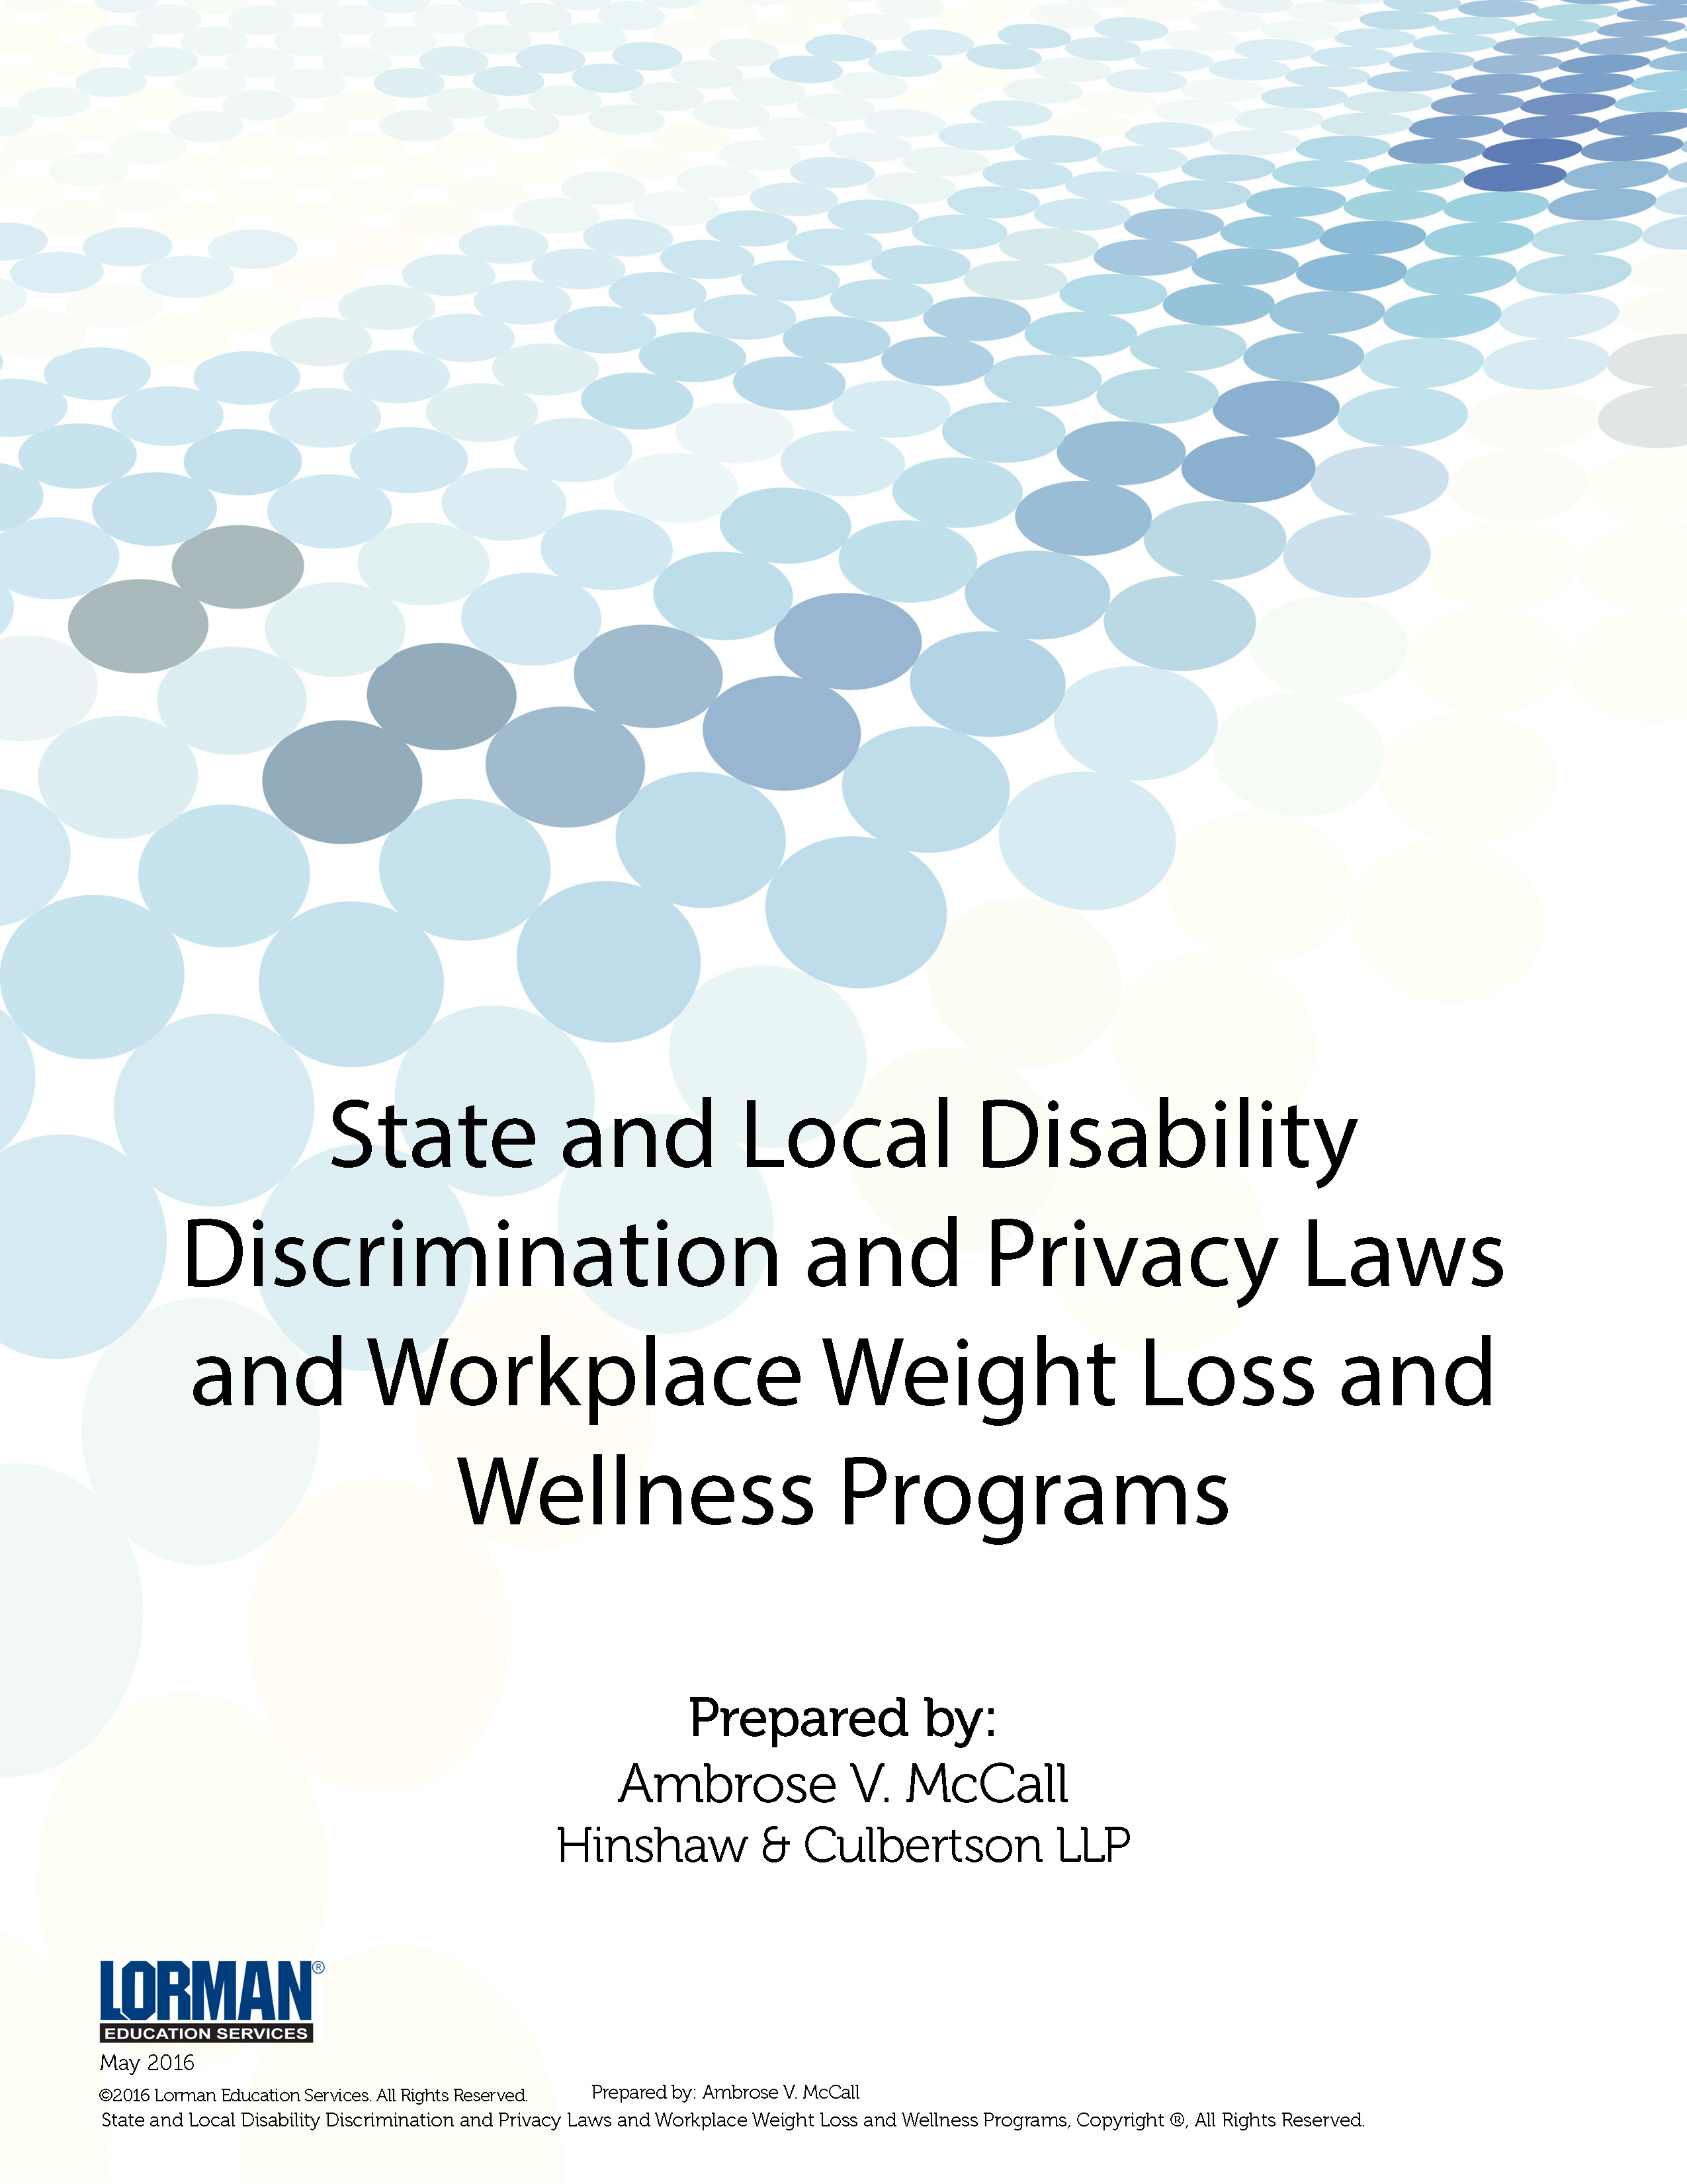 State and Local Disability Discrimination and Privacy Laws and Workplace Weight Loss and Wellness Programs